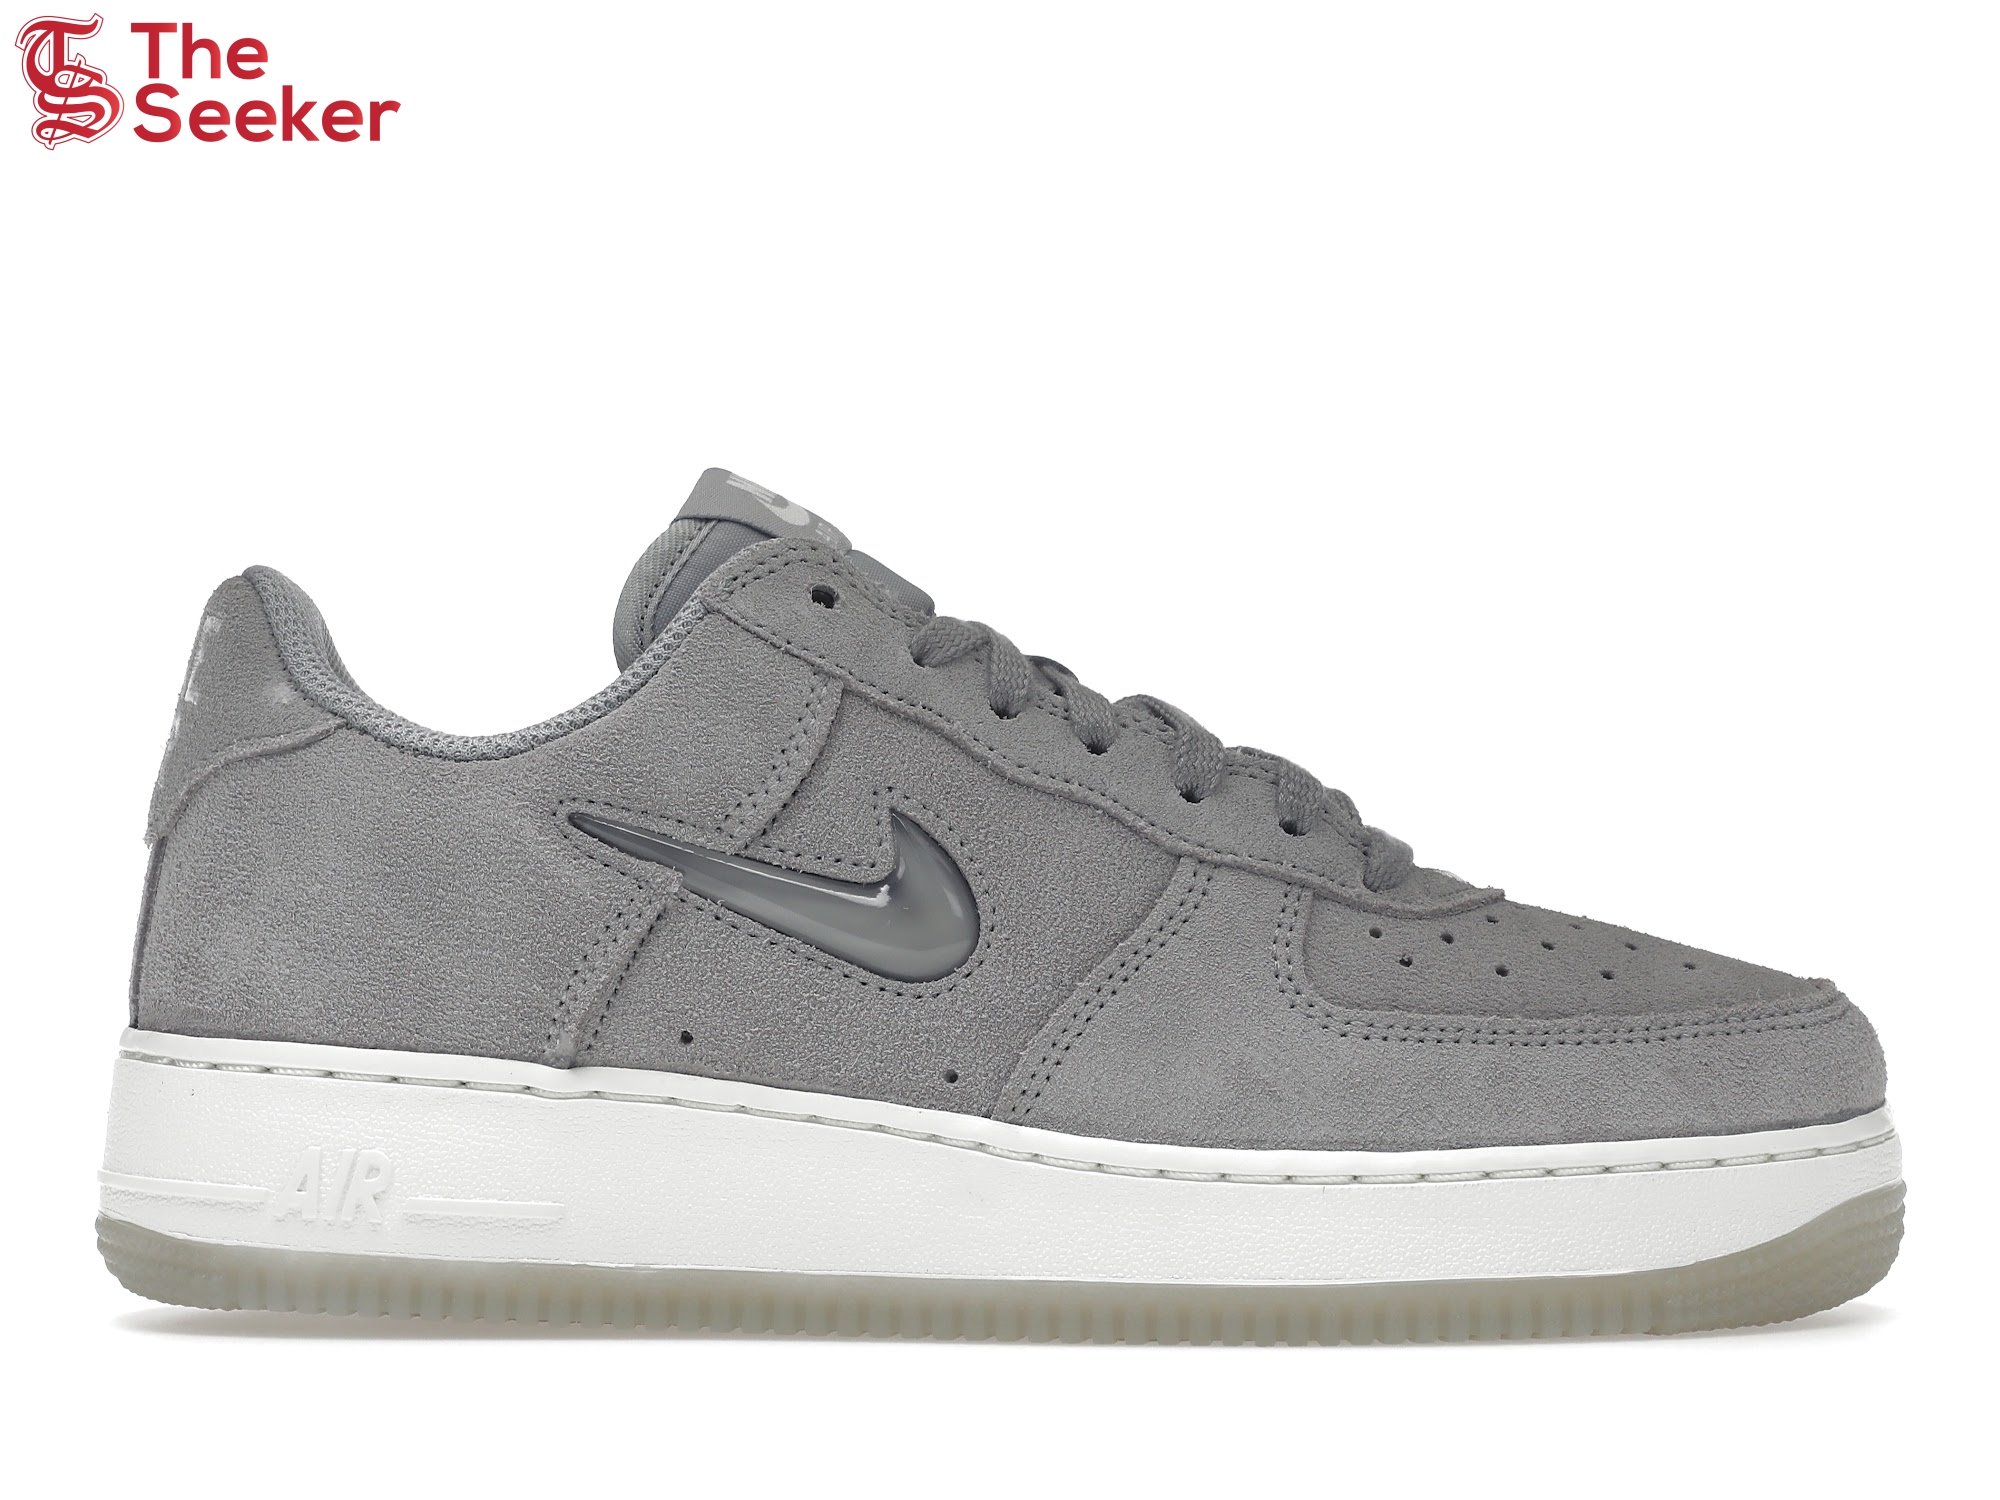 Nike Air Force 1 '07 Low Color of the Month Jewel Light Smoke Grey